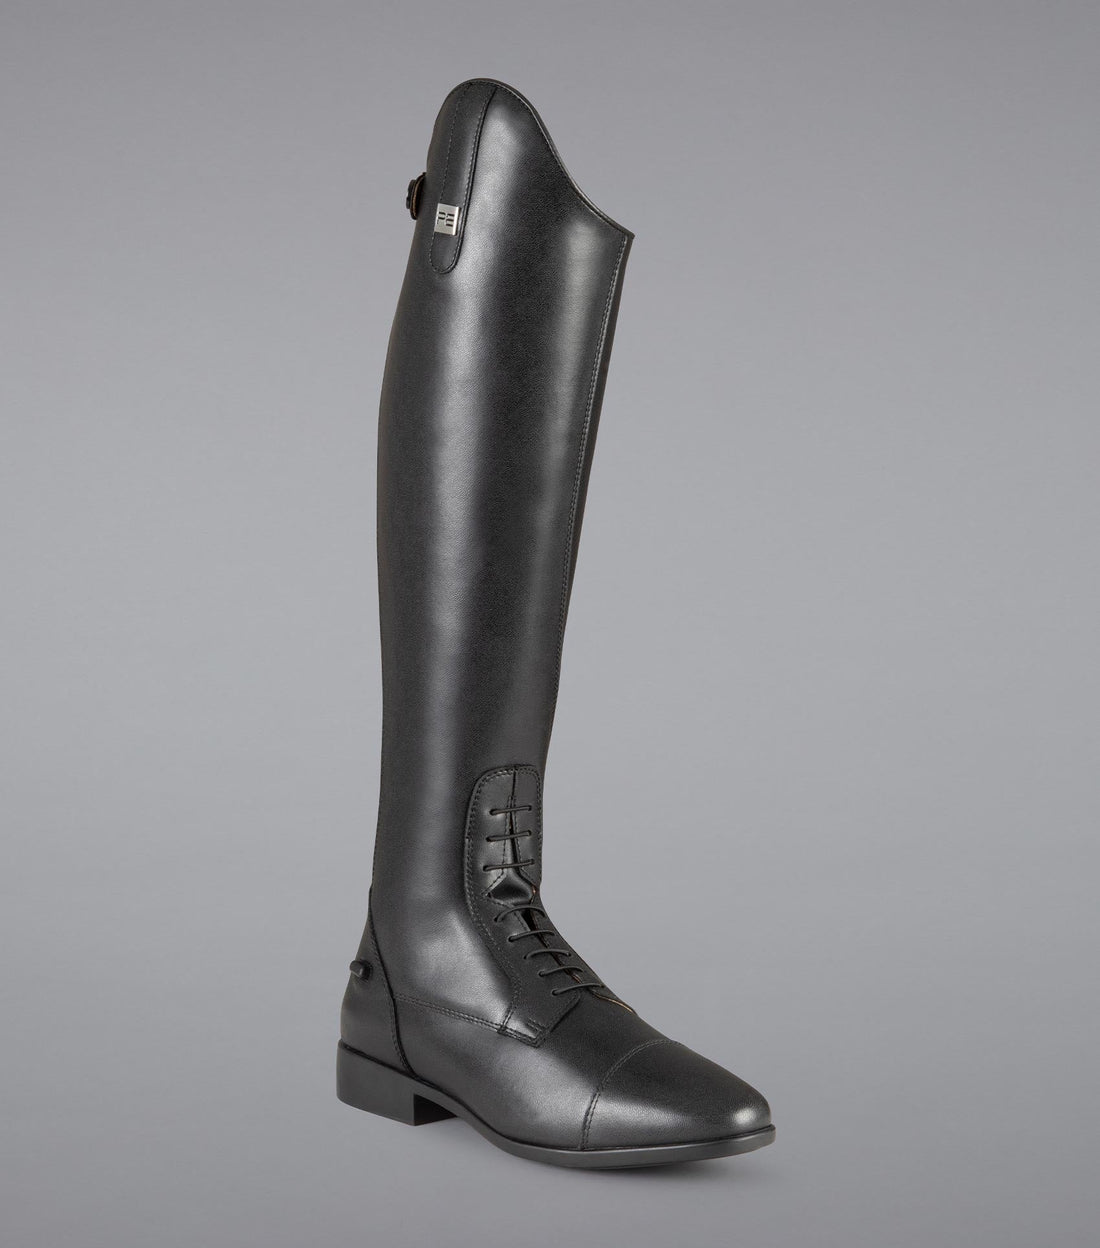 Description:Anima Ladies Synthetic Field Tall Riding Boot_Colour:Black_Position:1